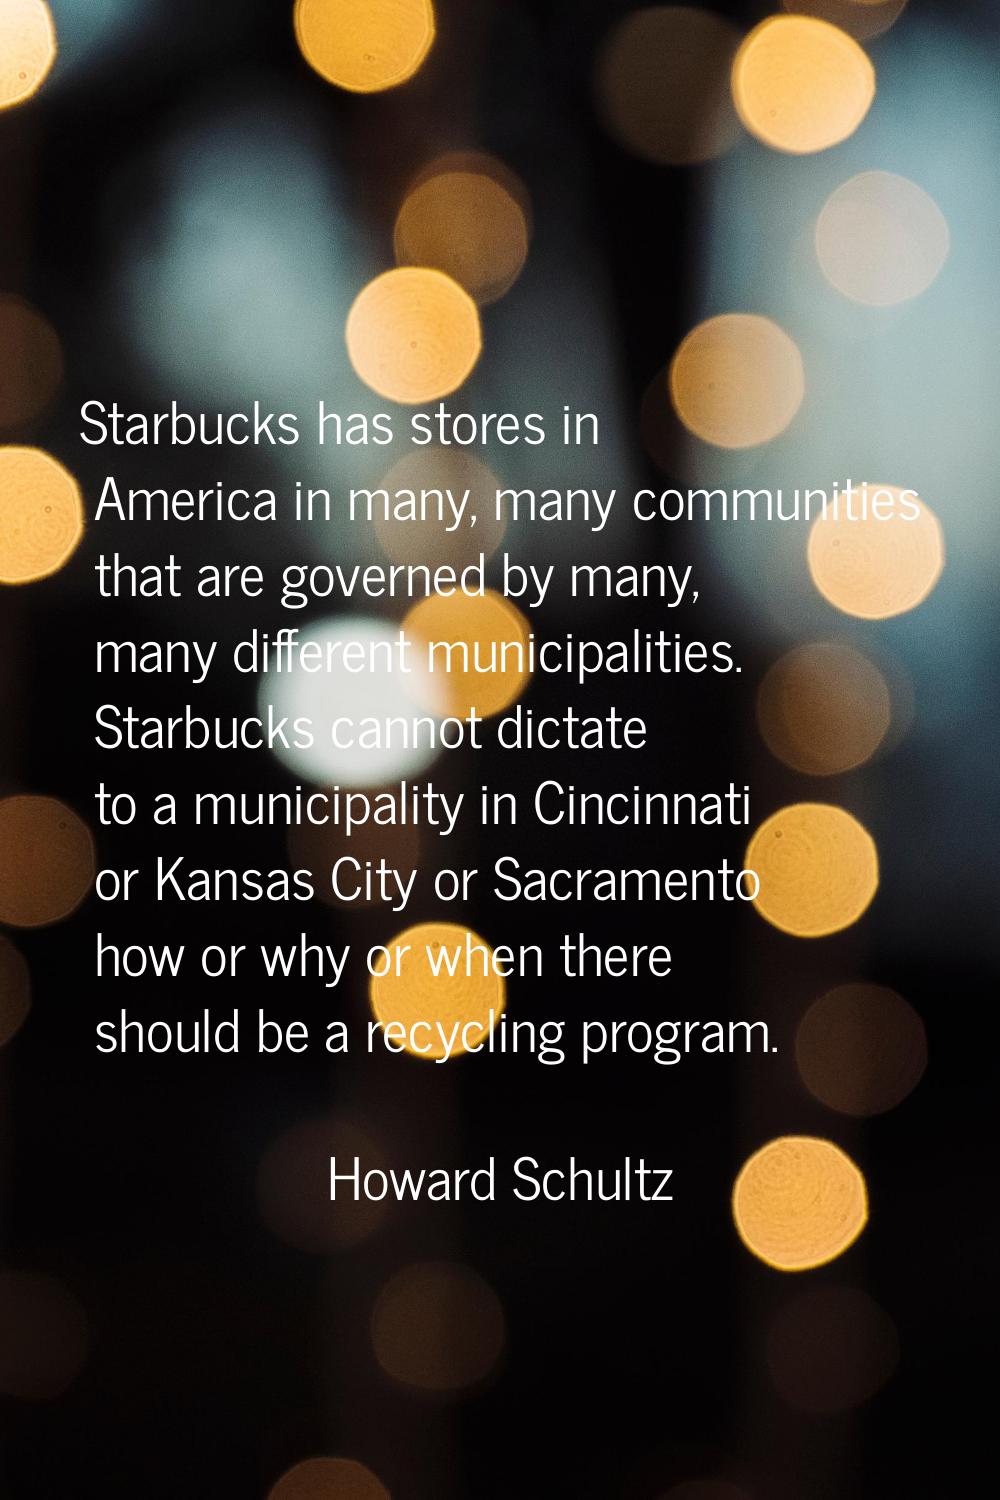 Starbucks has stores in America in many, many communities that are governed by many, many different